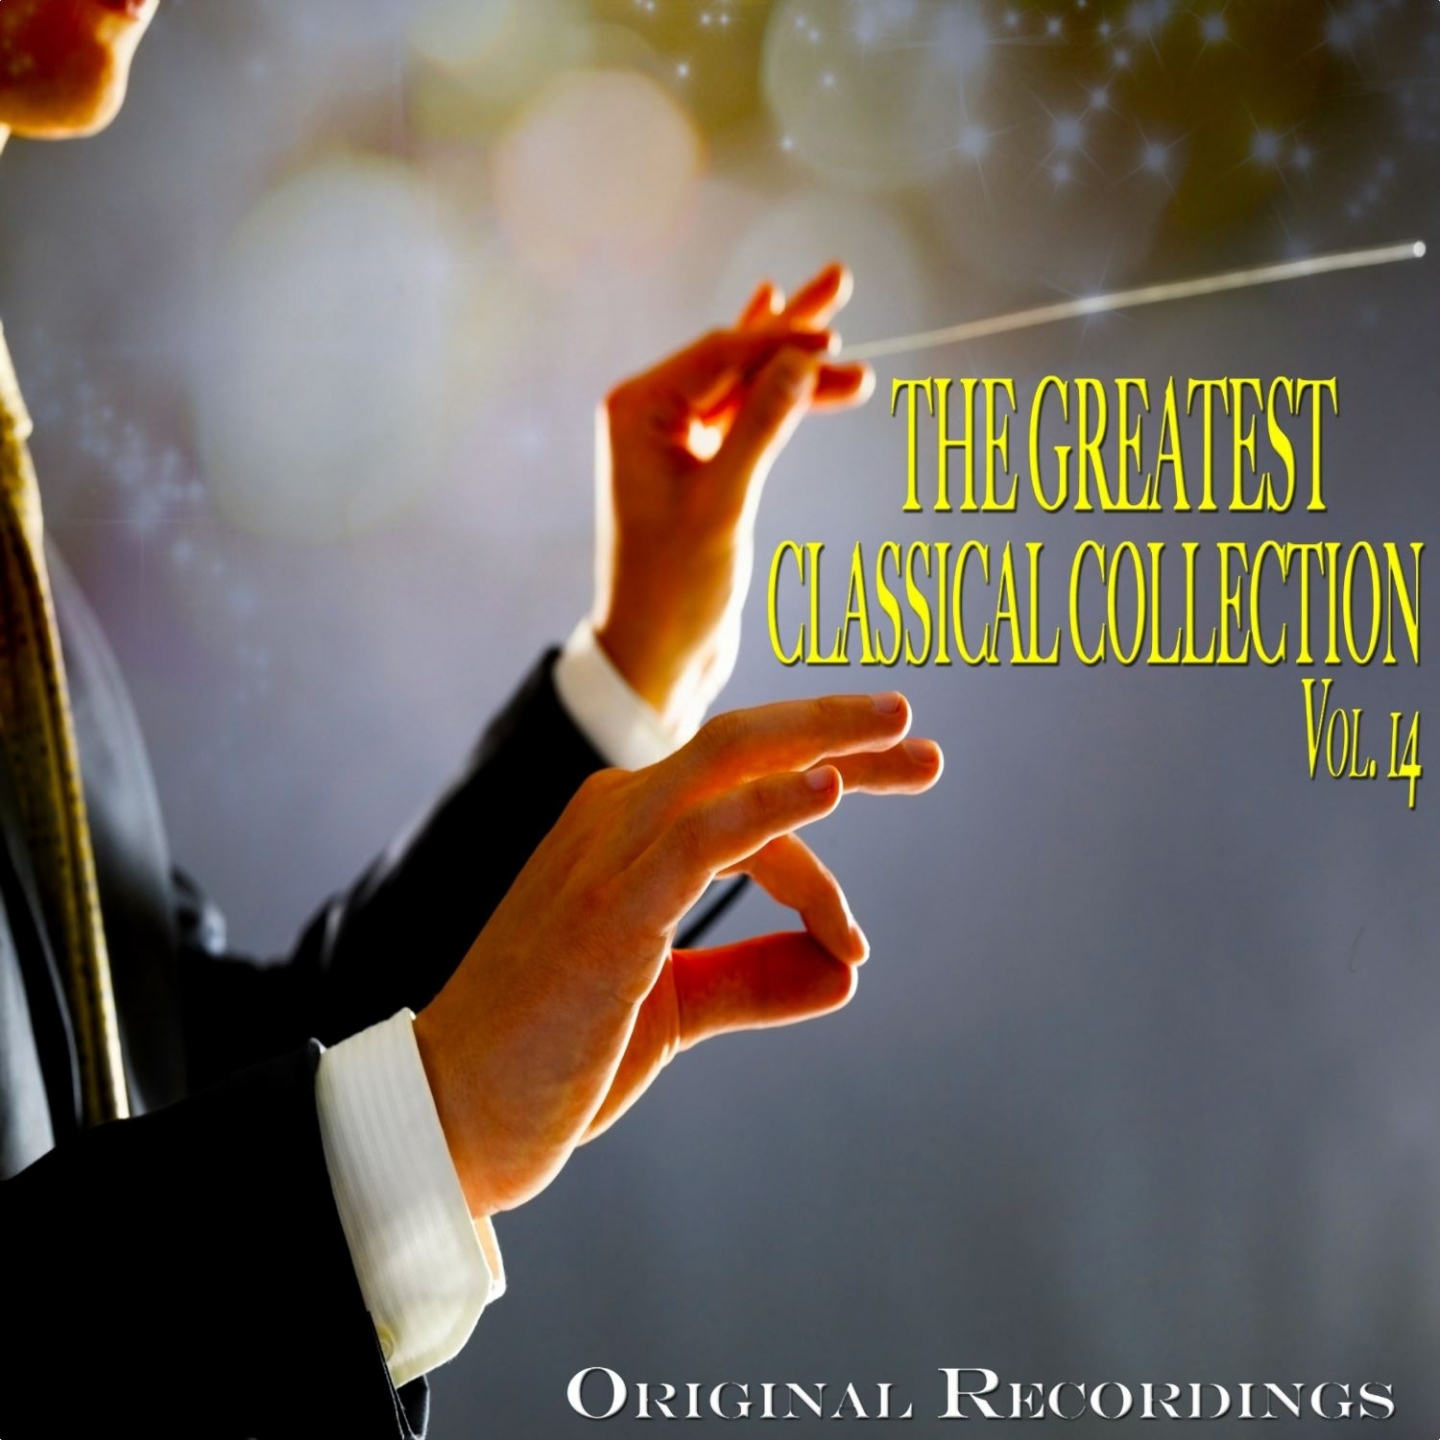 The Greatest Classical Collection Vol. 14